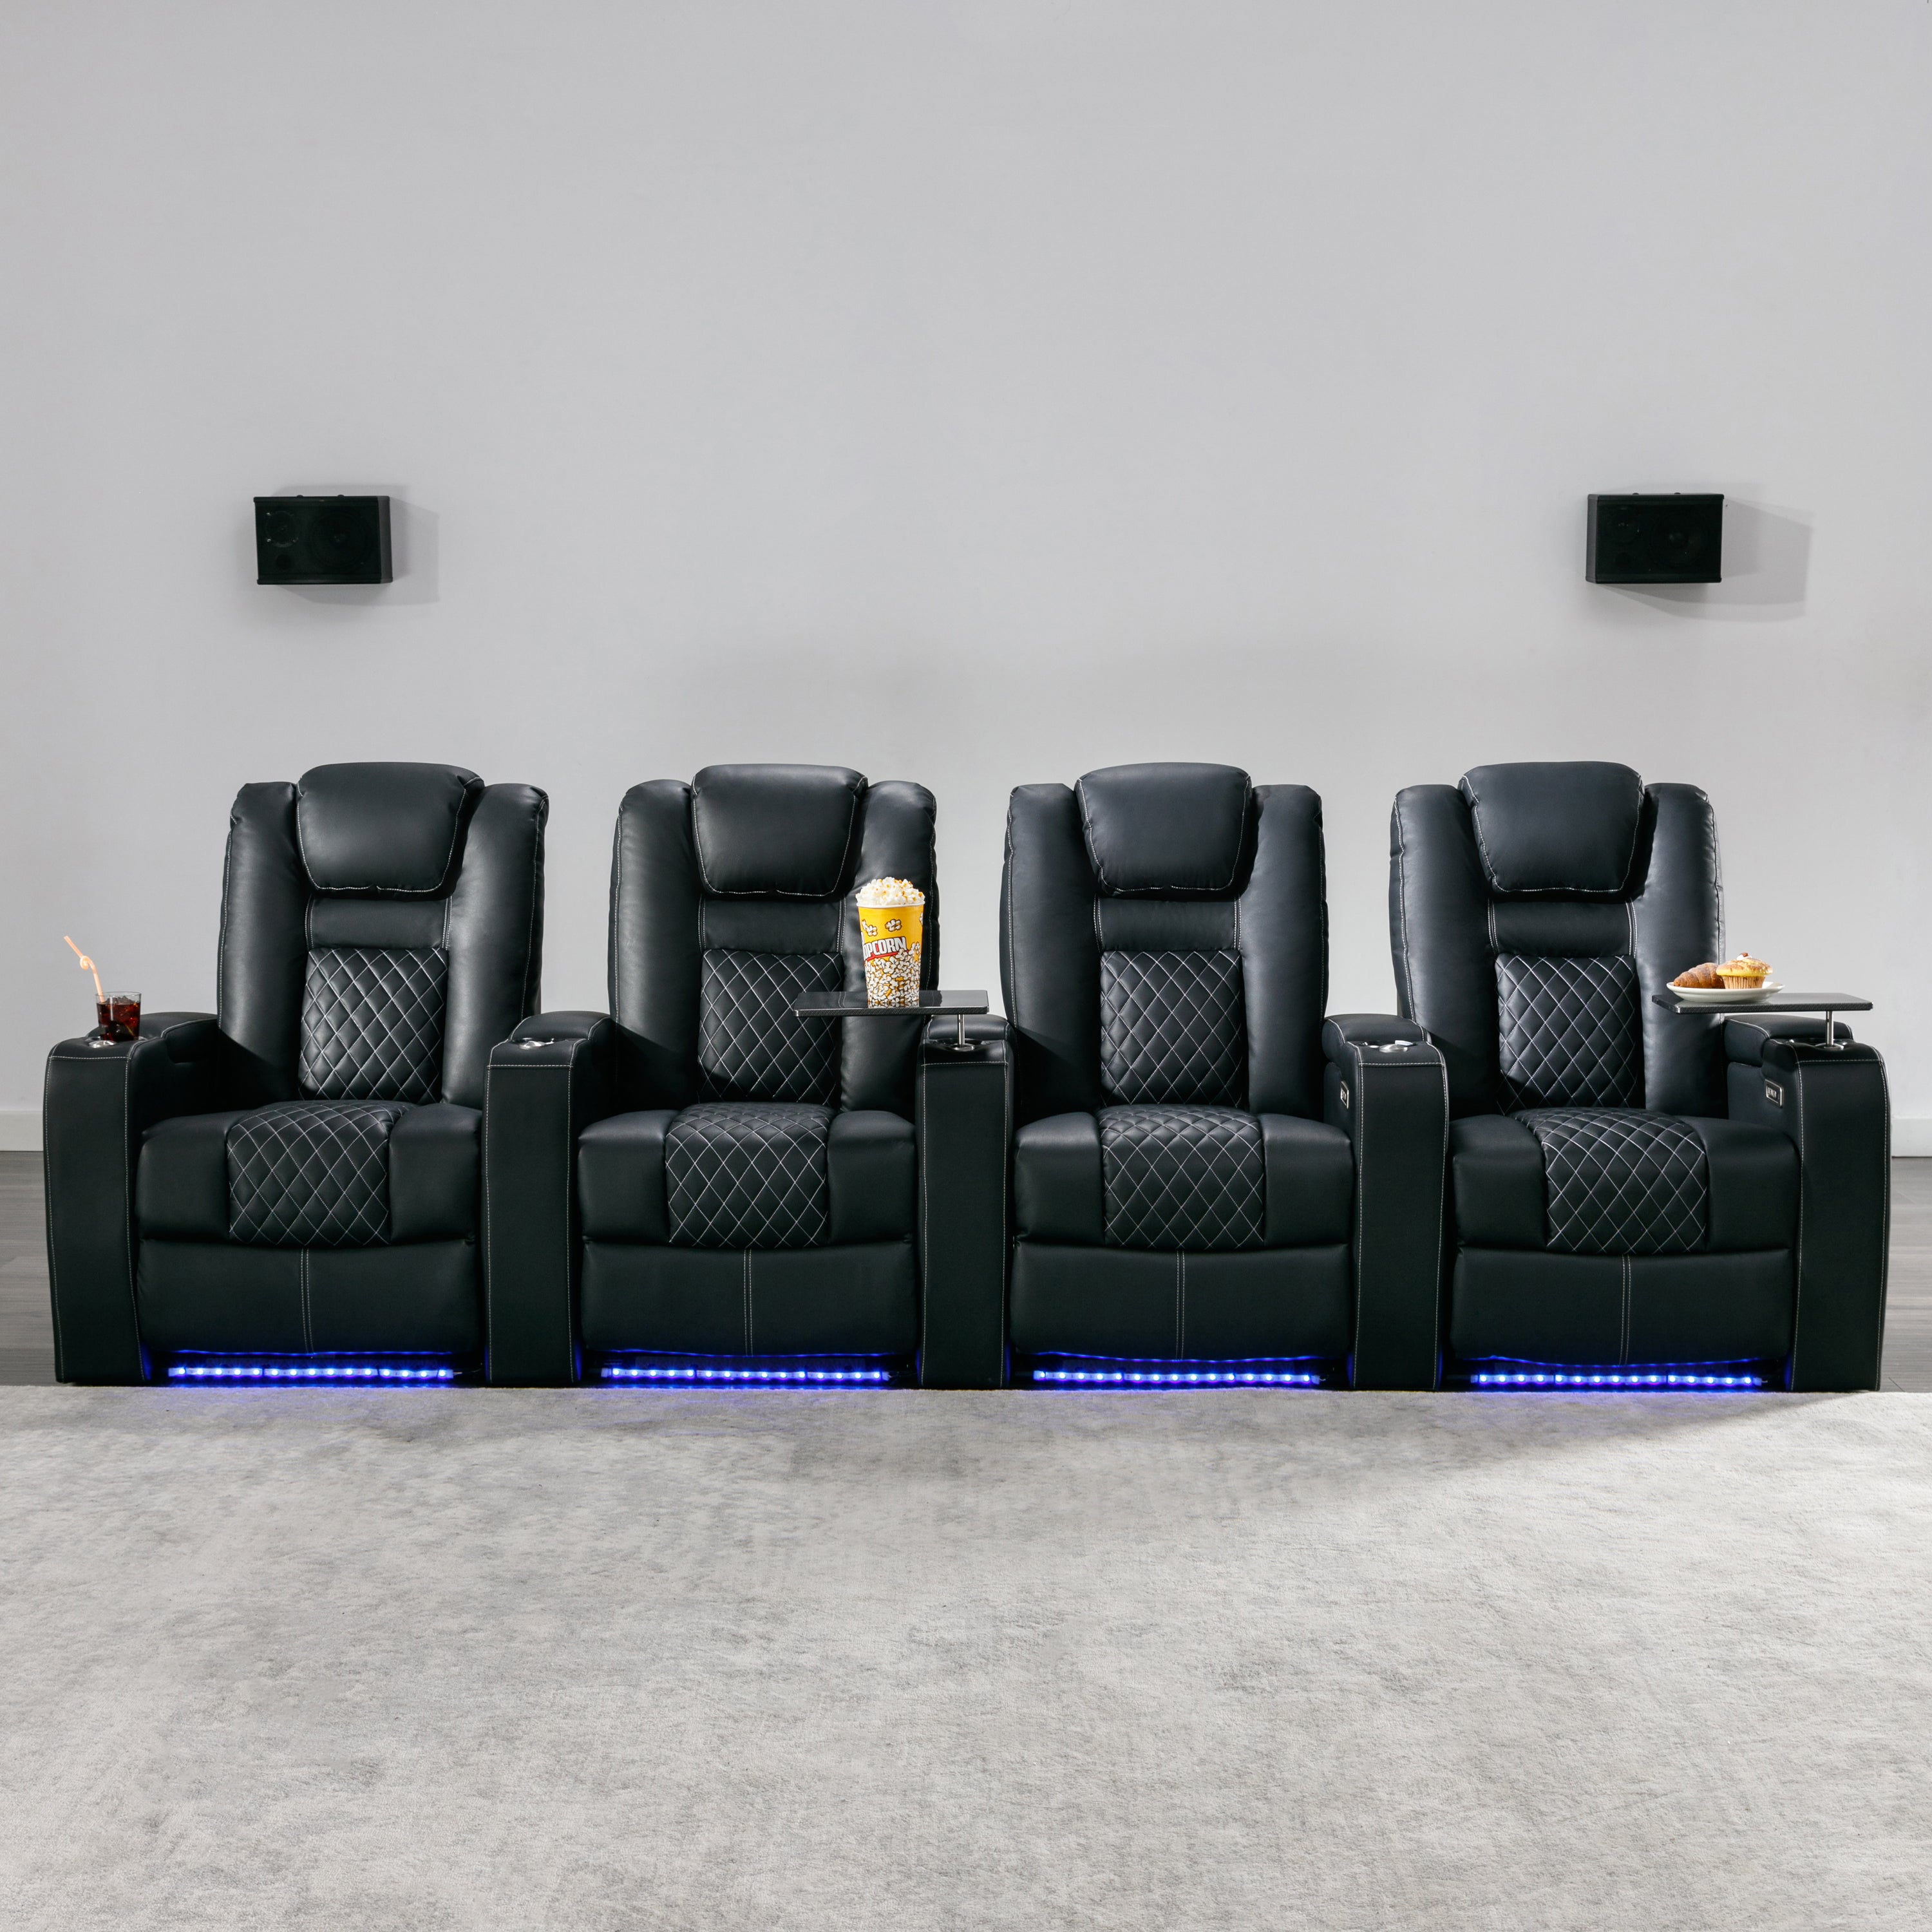  7 Reasons Why We Love the Broadway Cinema Chair 